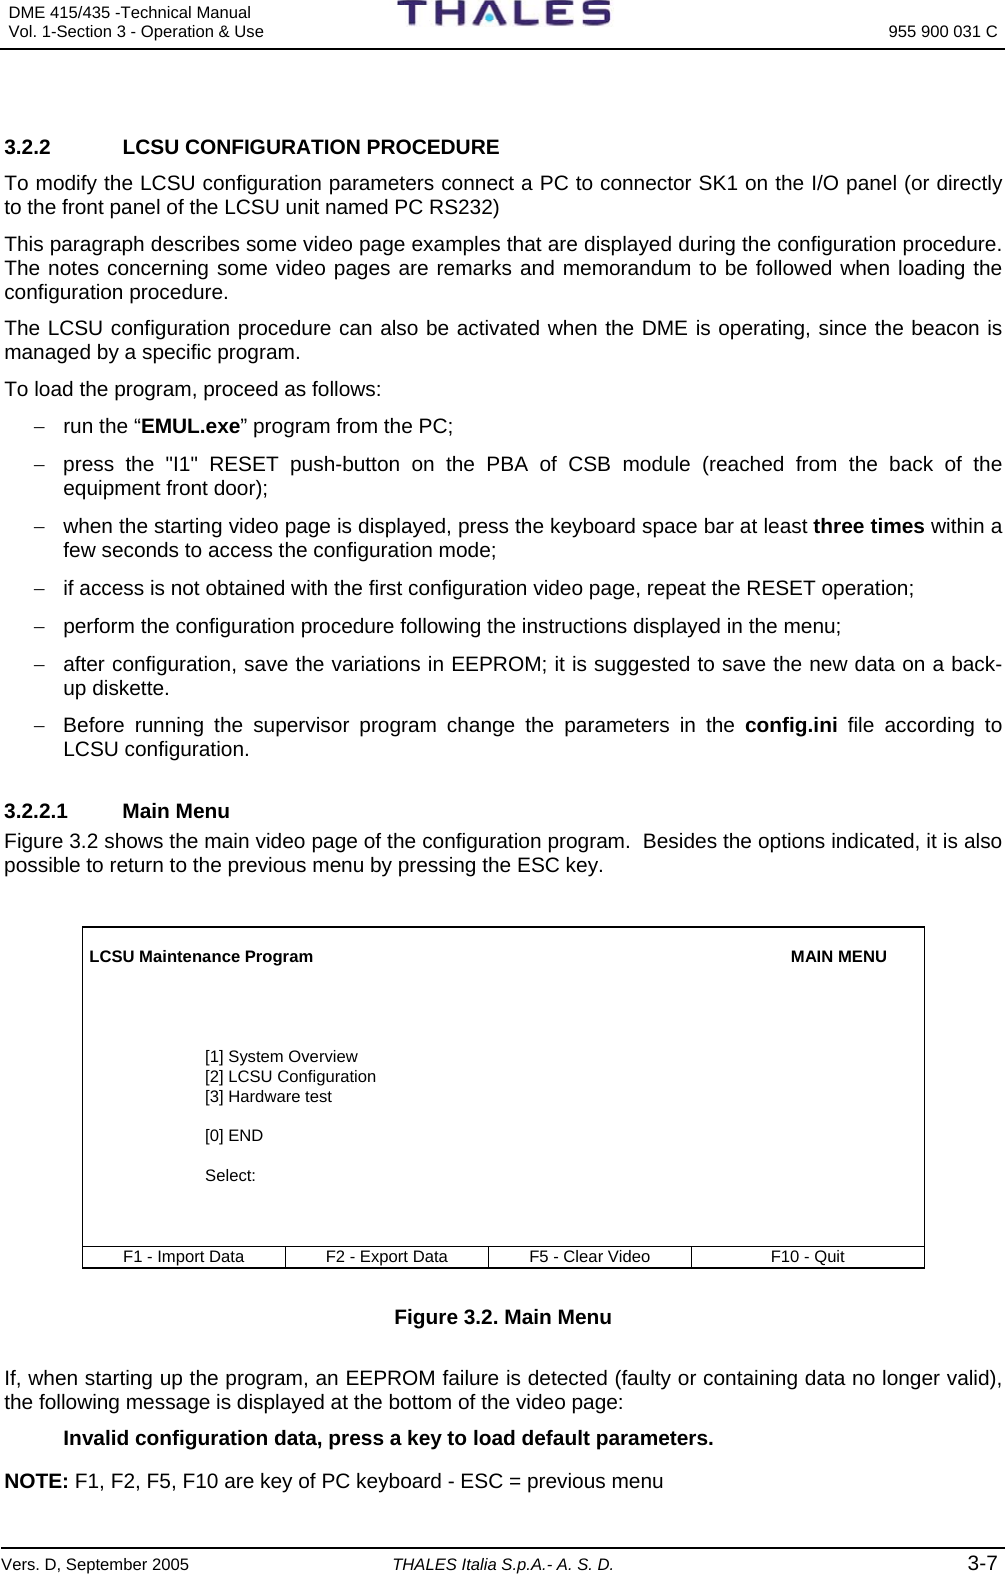 DME 415/435 -Technical Manual  Vol. 1-Section 3 - Operation &amp; Use   955 900 031 C Vers. D, September 2005 THALES Italia S.p.A.- A. S. D. 3-7  3.2.2  LCSU CONFIGURATION PROCEDURE To modify the LCSU configuration parameters connect a PC to connector SK1 on the I/O panel (or directly to the front panel of the LCSU unit named PC RS232) This paragraph describes some video page examples that are displayed during the configuration procedure. The notes concerning some video pages are remarks and memorandum to be followed when loading the configuration procedure. The LCSU configuration procedure can also be activated when the DME is operating, since the beacon is managed by a specific program. To load the program, proceed as follows: −  run the “EMUL.exe” program from the PC; −  press the &quot;I1&quot; RESET push-button on the PBA of CSB module (reached from the back of the equipment front door); −  when the starting video page is displayed, press the keyboard space bar at least three times within a few seconds to access the configuration mode; −  if access is not obtained with the first configuration video page, repeat the RESET operation; −  perform the configuration procedure following the instructions displayed in the menu; −  after configuration, save the variations in EEPROM; it is suggested to save the new data on a back-up diskette. −  Before running the supervisor program change the parameters in the config.ini file according to LCSU configuration. 3.2.2.1 Main Menu Figure 3.2 shows the main video page of the configuration program.  Besides the options indicated, it is also possible to return to the previous menu by pressing the ESC key.   LCSU Maintenance Program    MAIN MENU                                                            [1] System Overview                          [2] LCSU Configuration                          [3] Hardware test                           [0] END                            Select:     F1 - Import Data  F2 - Export Data  F5 - Clear Video  F10 - Quit  Figure 3.2. Main Menu  If, when starting up the program, an EEPROM failure is detected (faulty or containing data no longer valid), the following message is displayed at the bottom of the video page: Invalid configuration data, press a key to load default parameters. NOTE: F1, F2, F5, F10 are key of PC keyboard - ESC = previous menu  